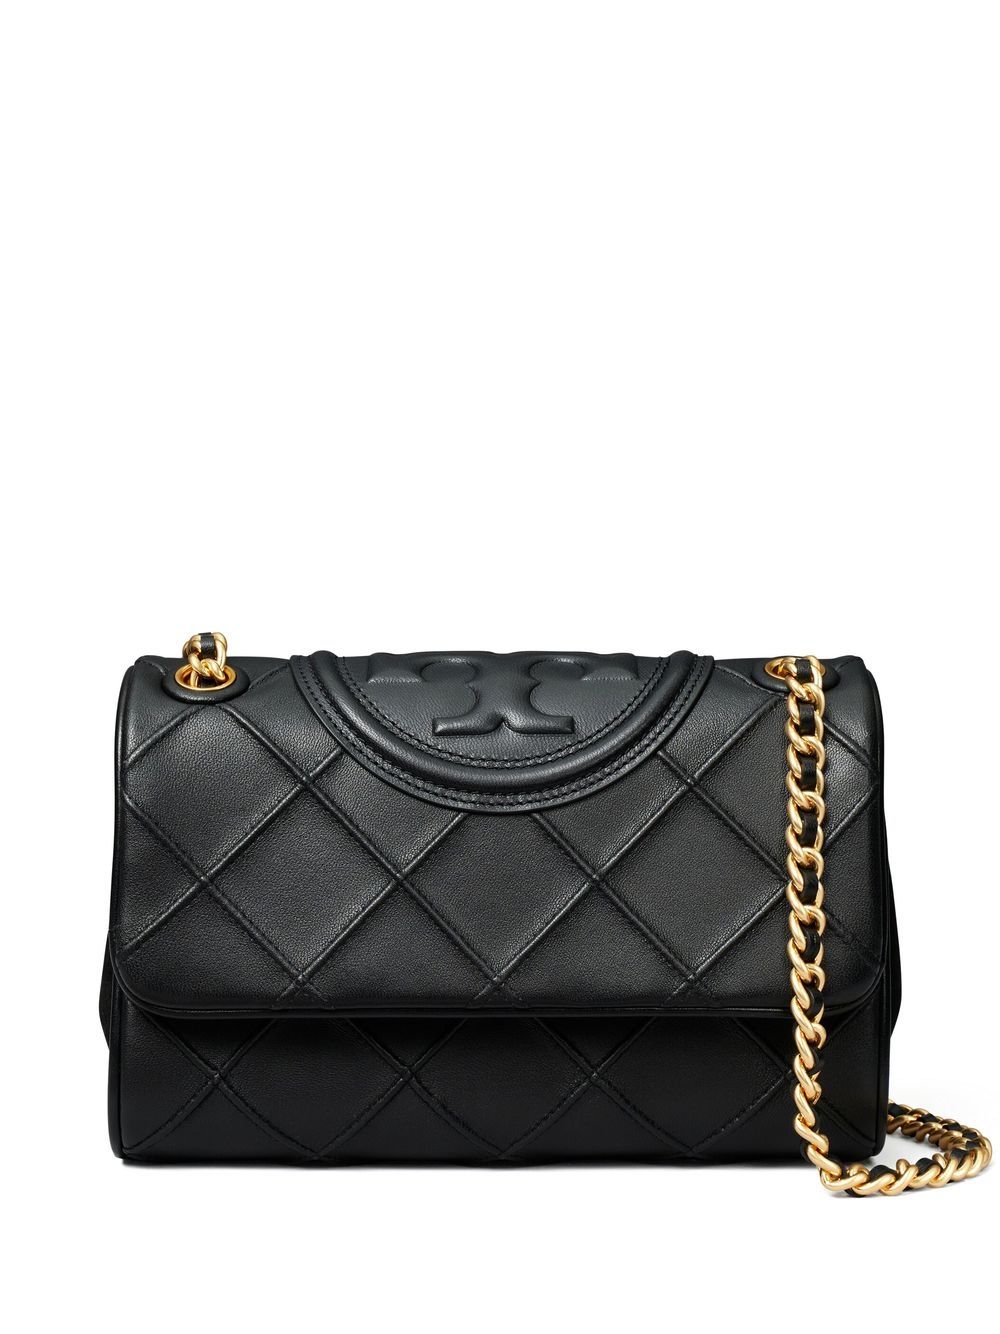 TORY BURCH Quilted Nappa Leather Convertible Mini Shoulder Bag in Black with Gold-Tone Accents